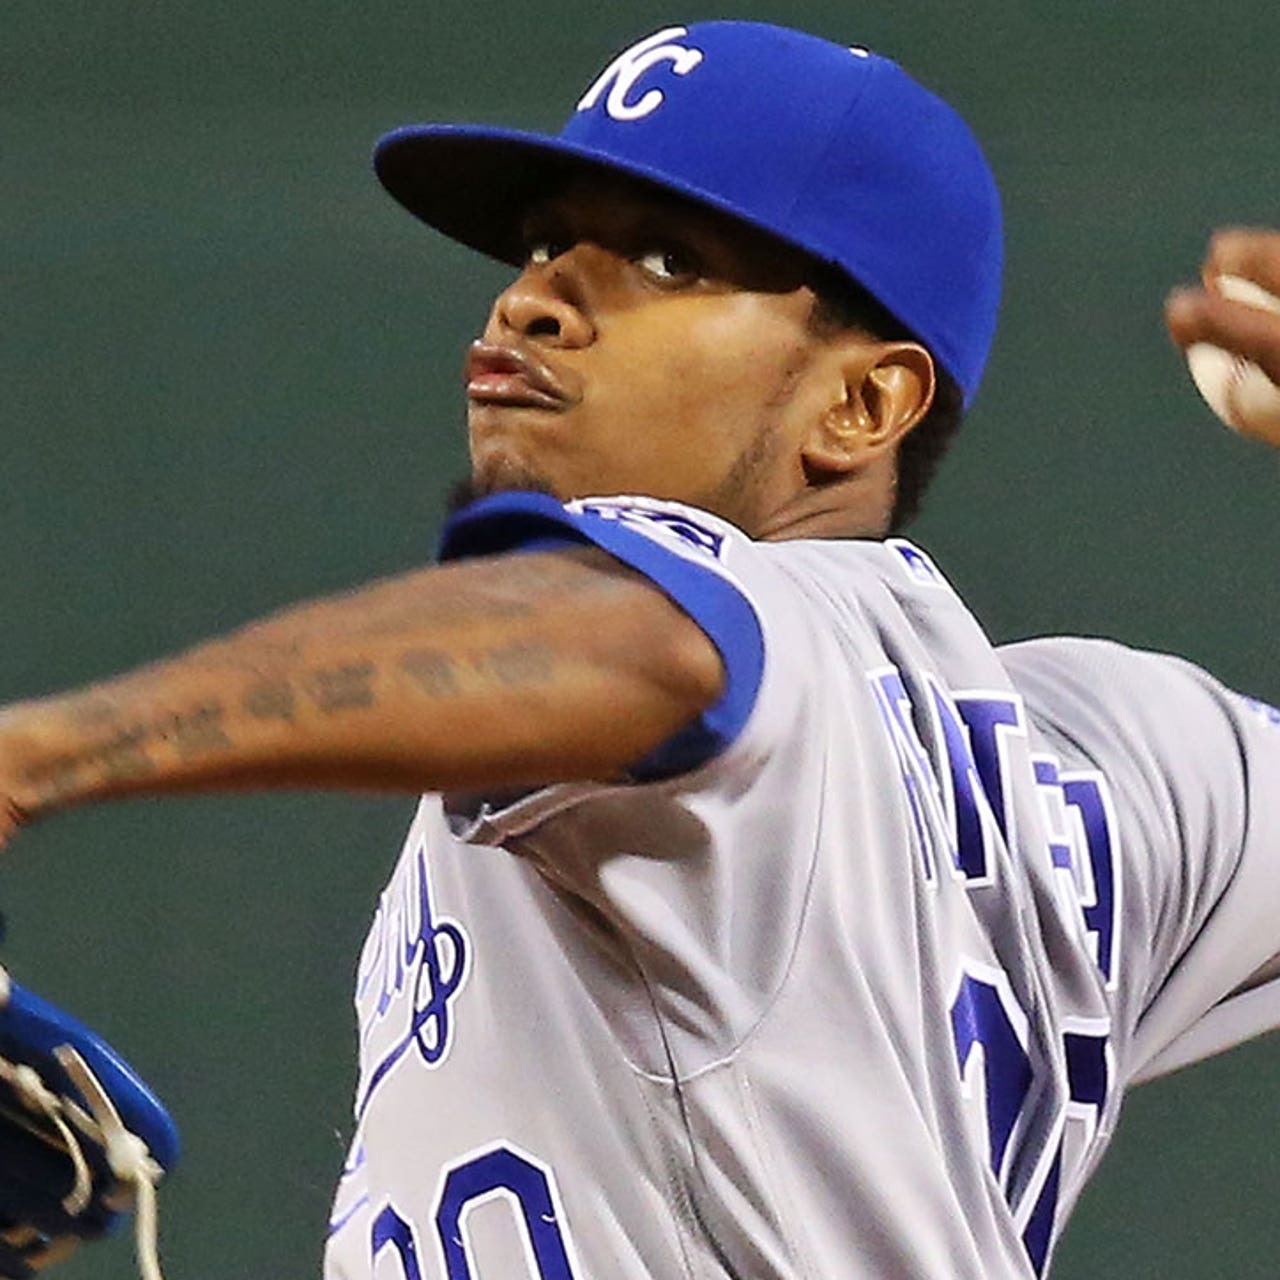 Yordano Ventura and Andy Marte killed in tragic car accidents